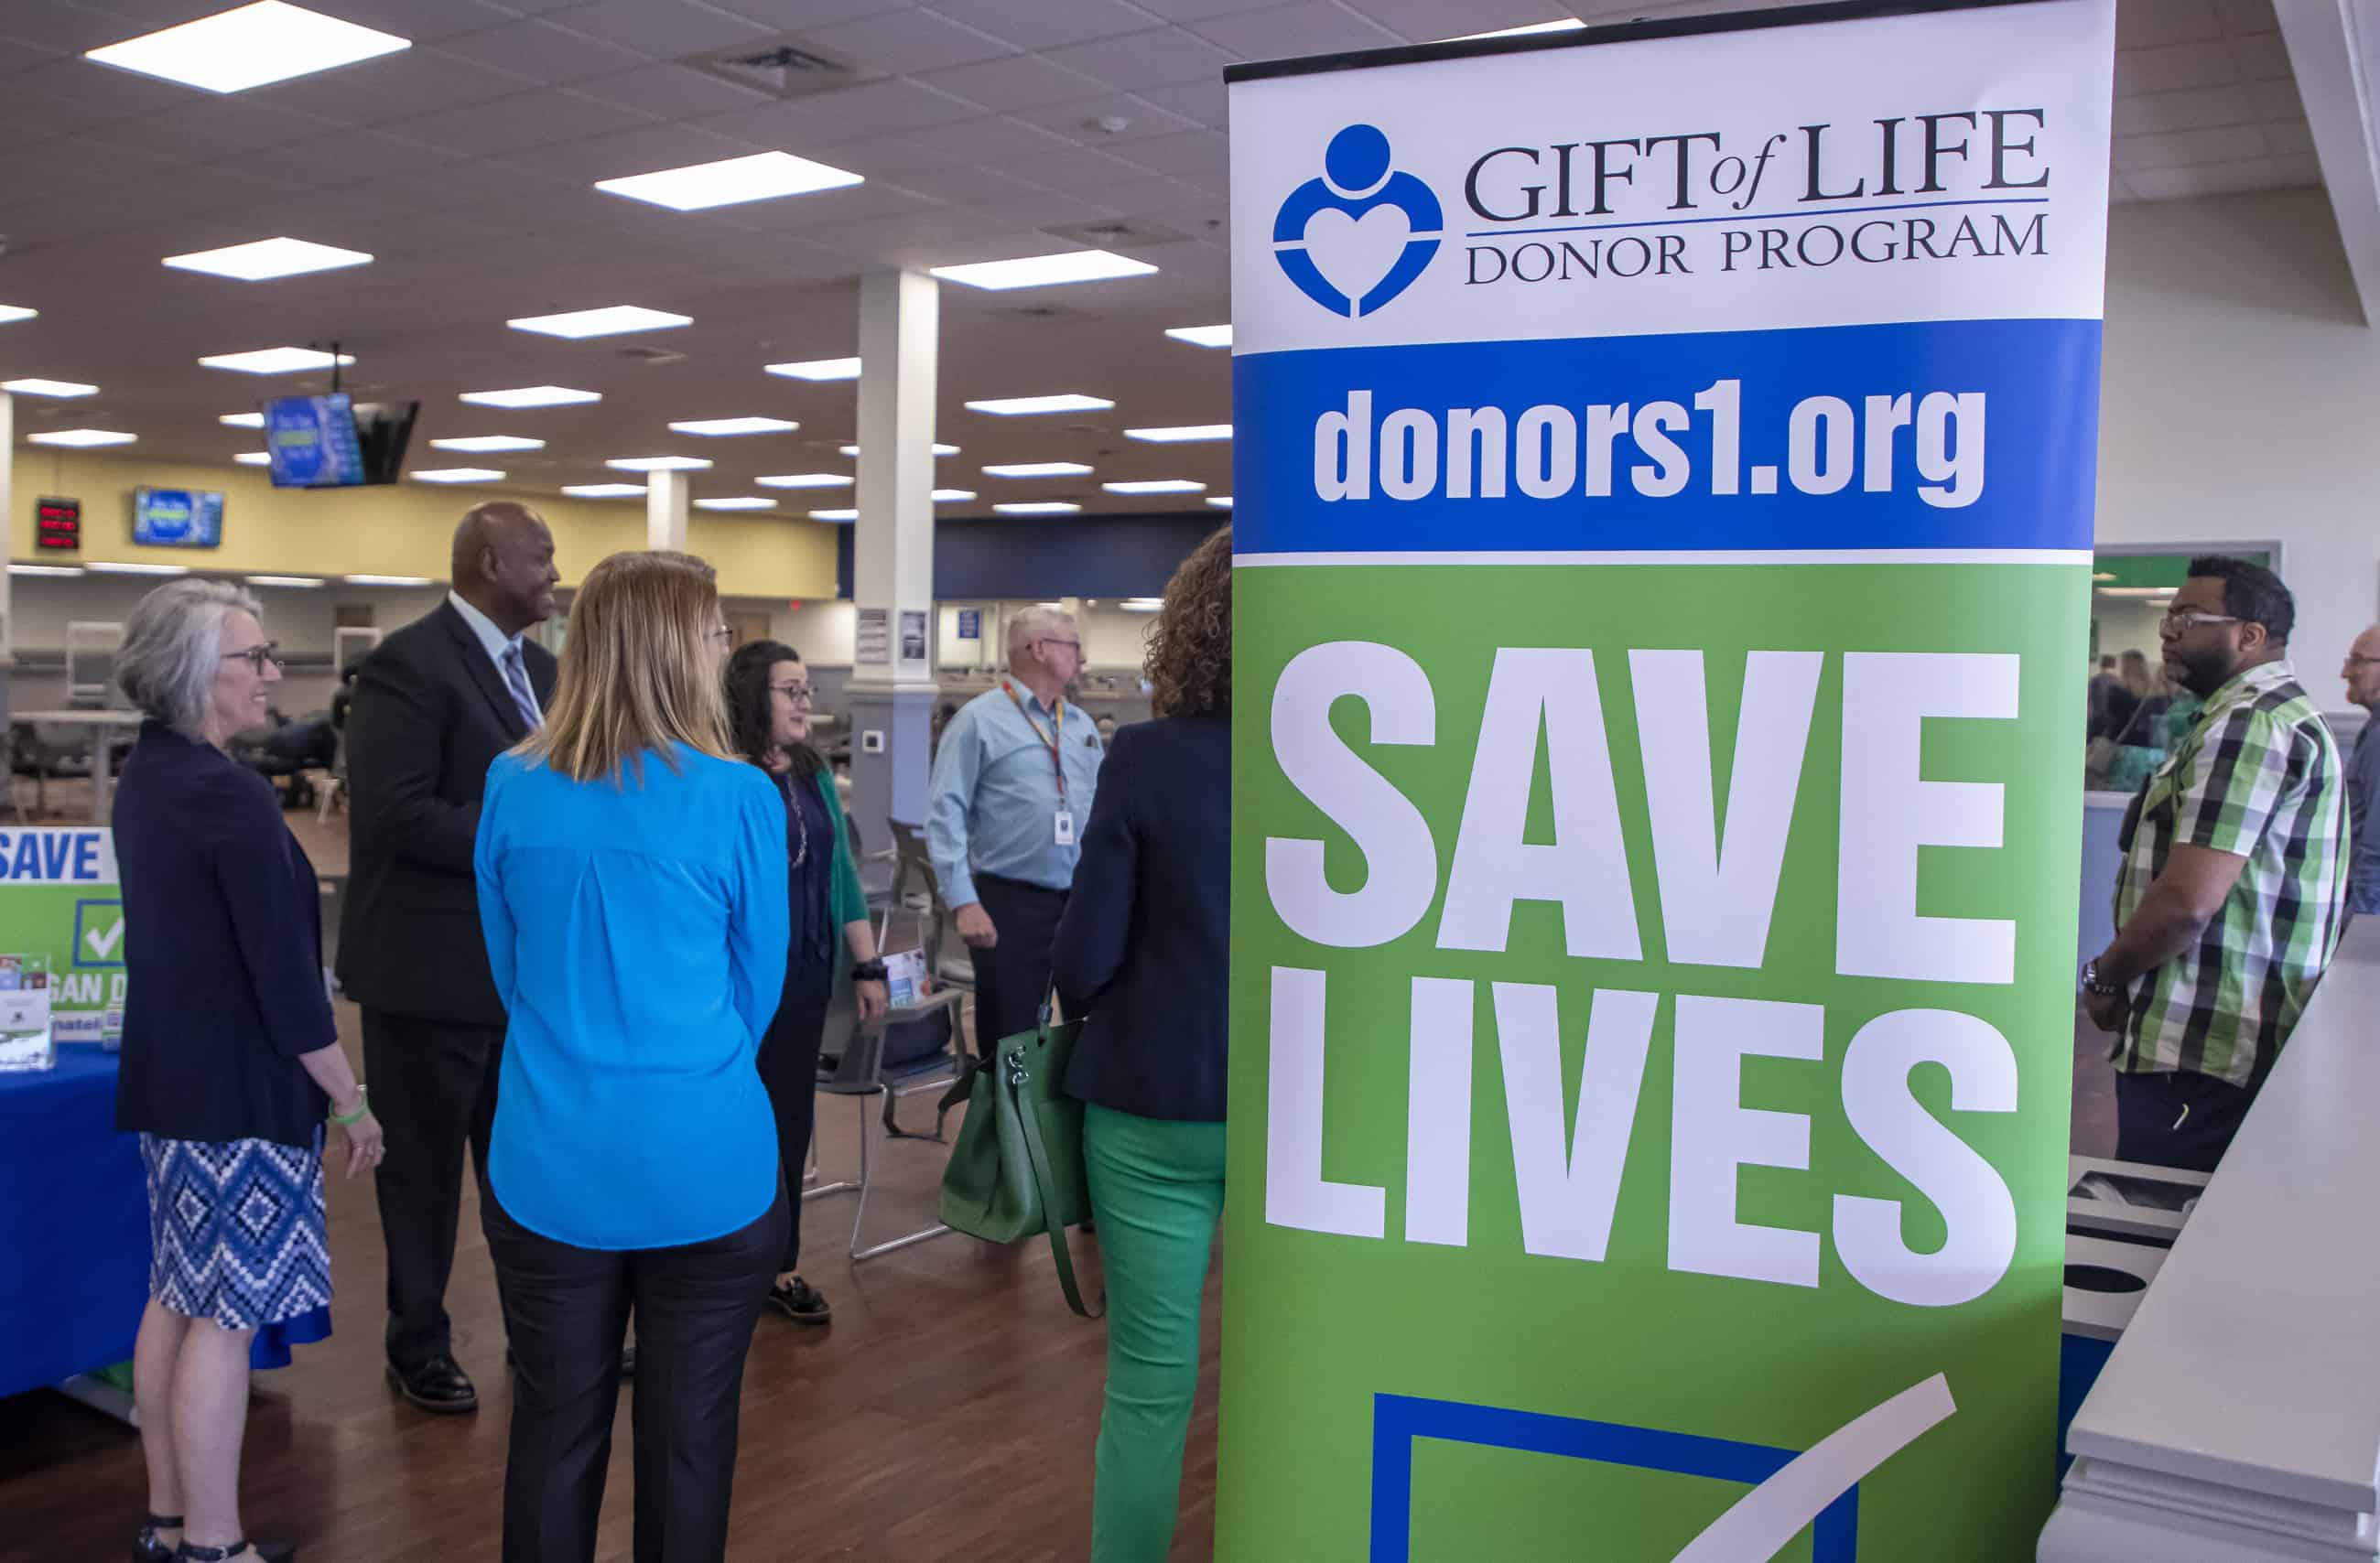 A group of people stand to the left of a large banner that reads Save Lives and promotes the Gift of Life Donor Program.